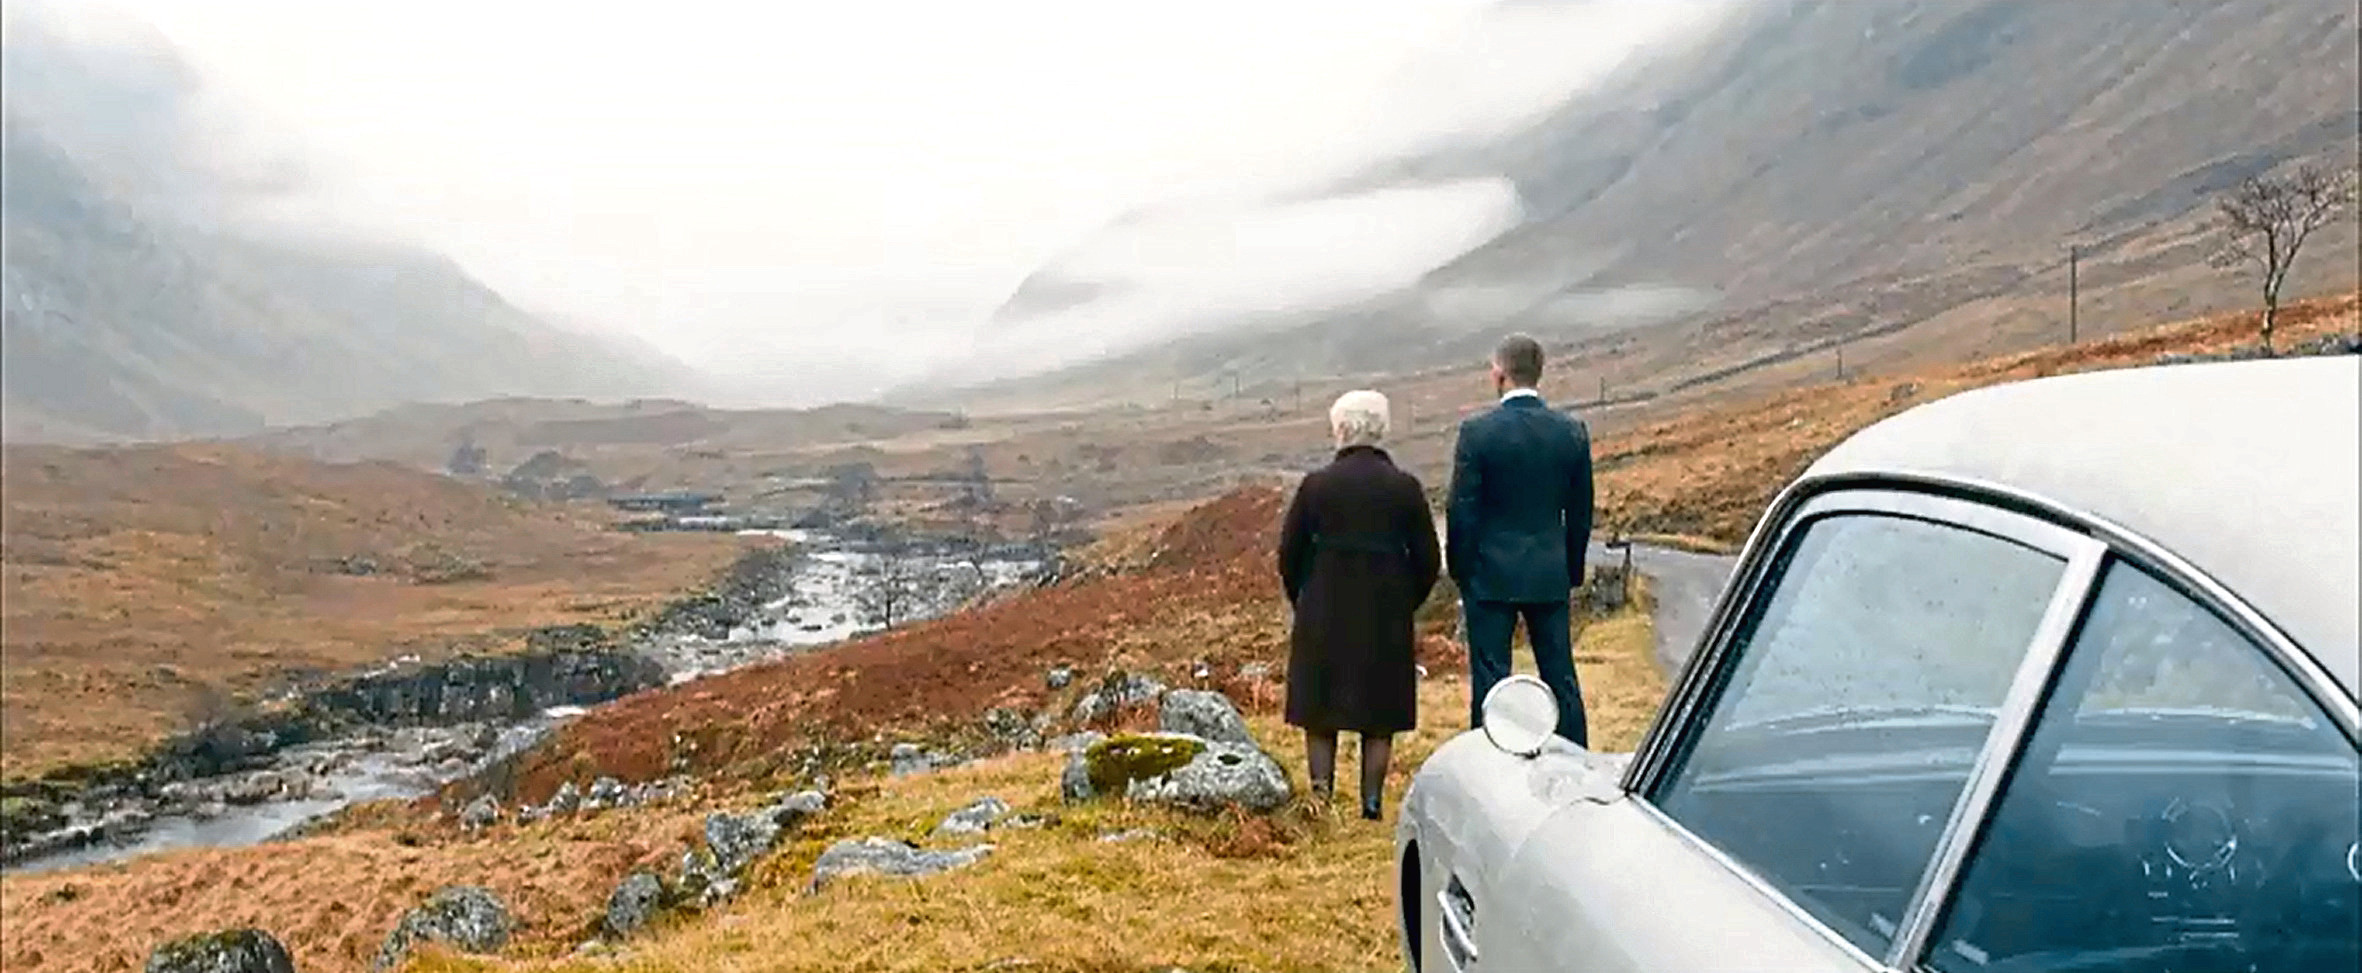 Screengrab from the trailer for the new Bond film SKYFALL



(Submitted)